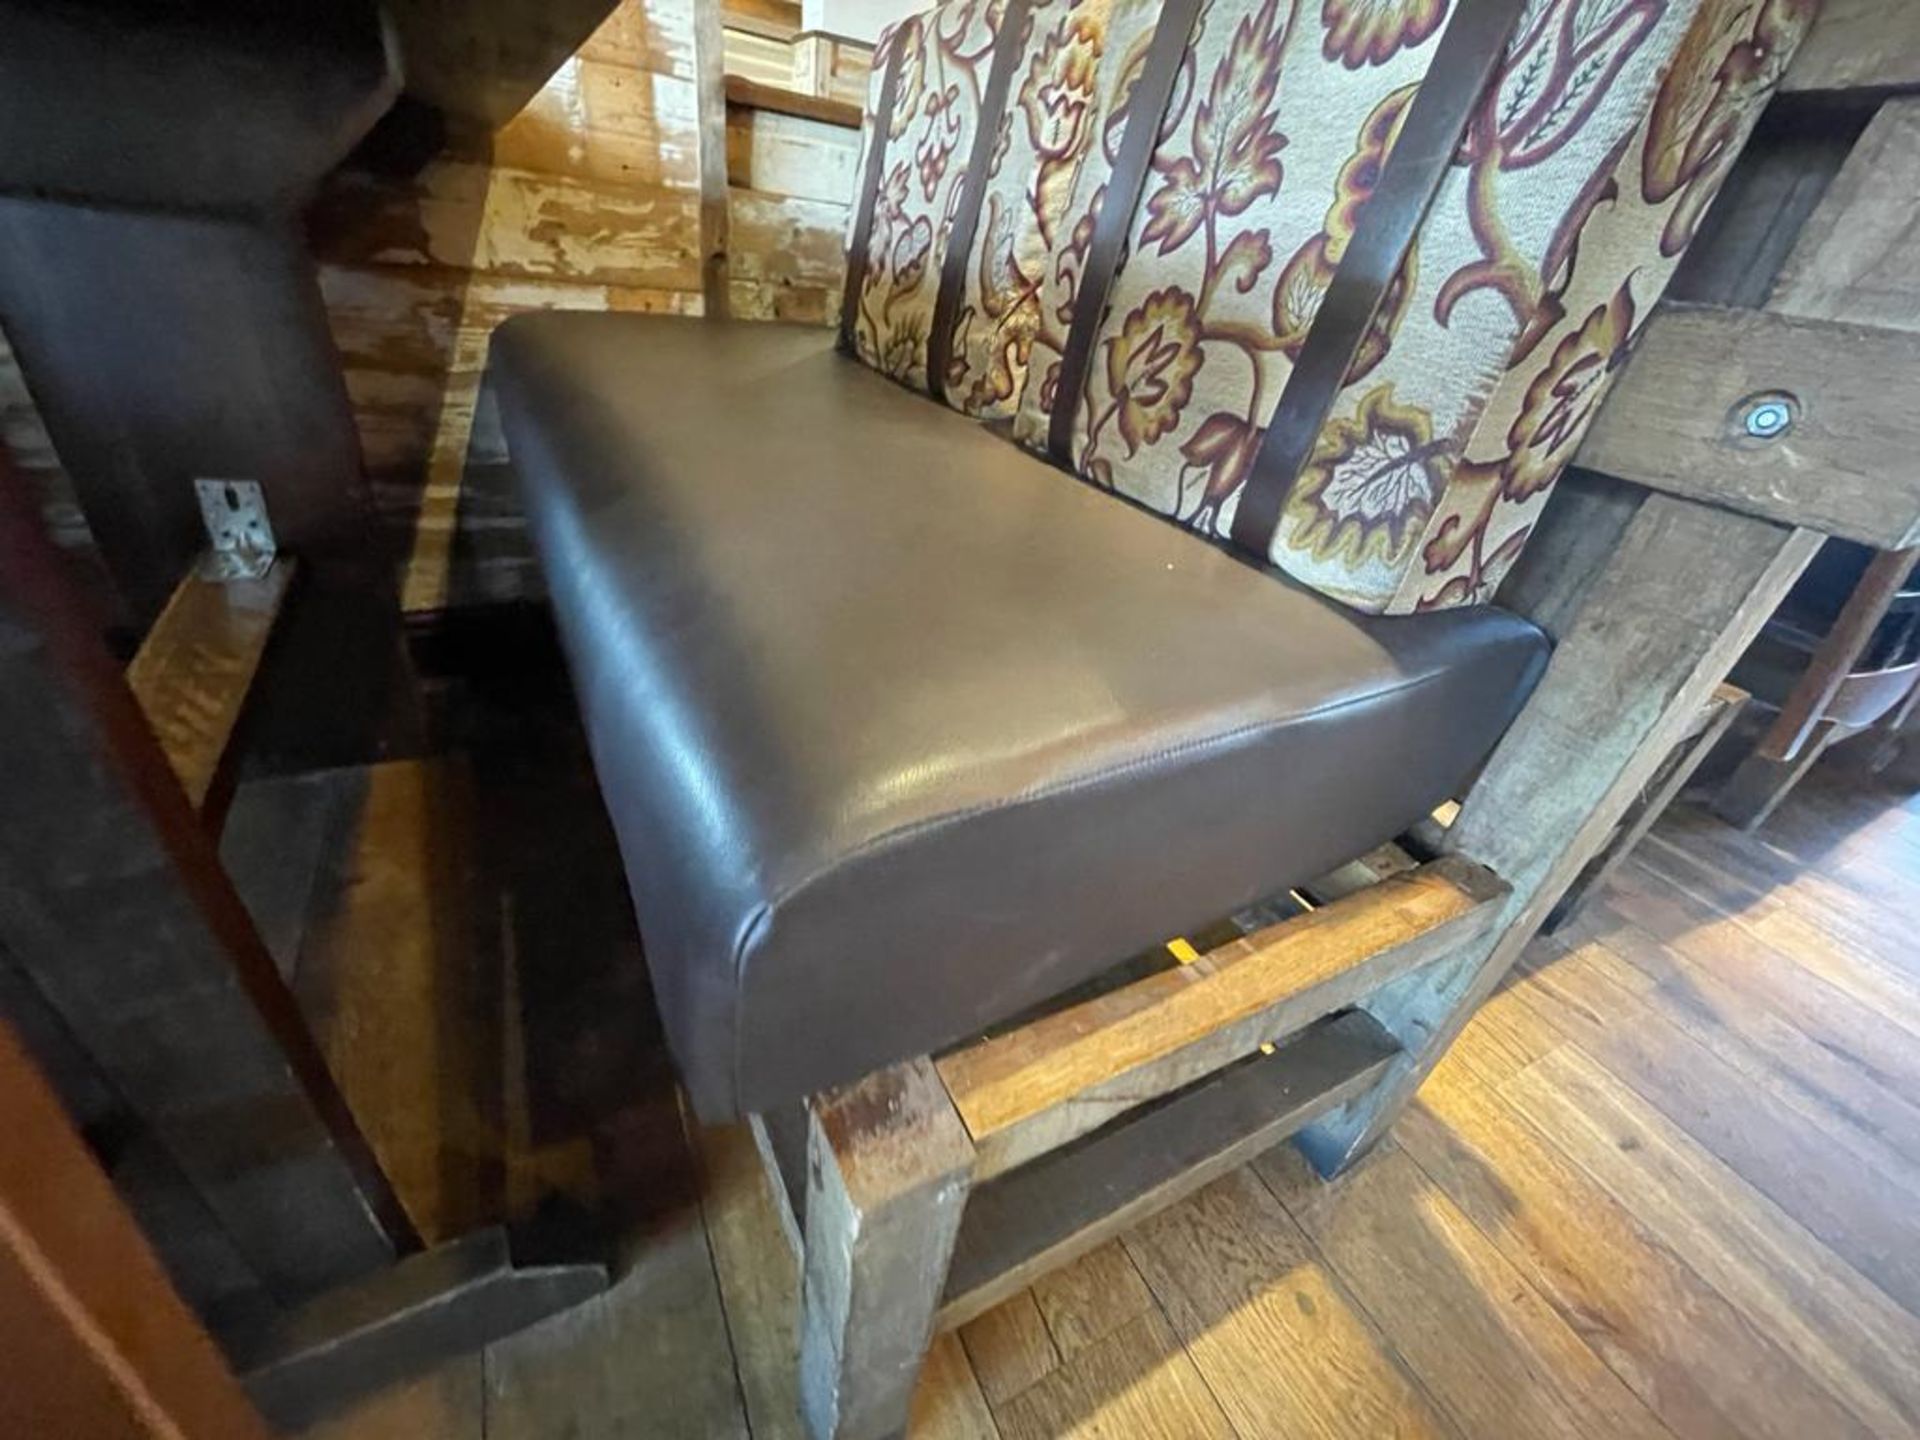 2 x Rustic Seating Benches Featuring Timber Frames, Brown Faux Leather Seat Pads and Floral Fabric - Image 4 of 13